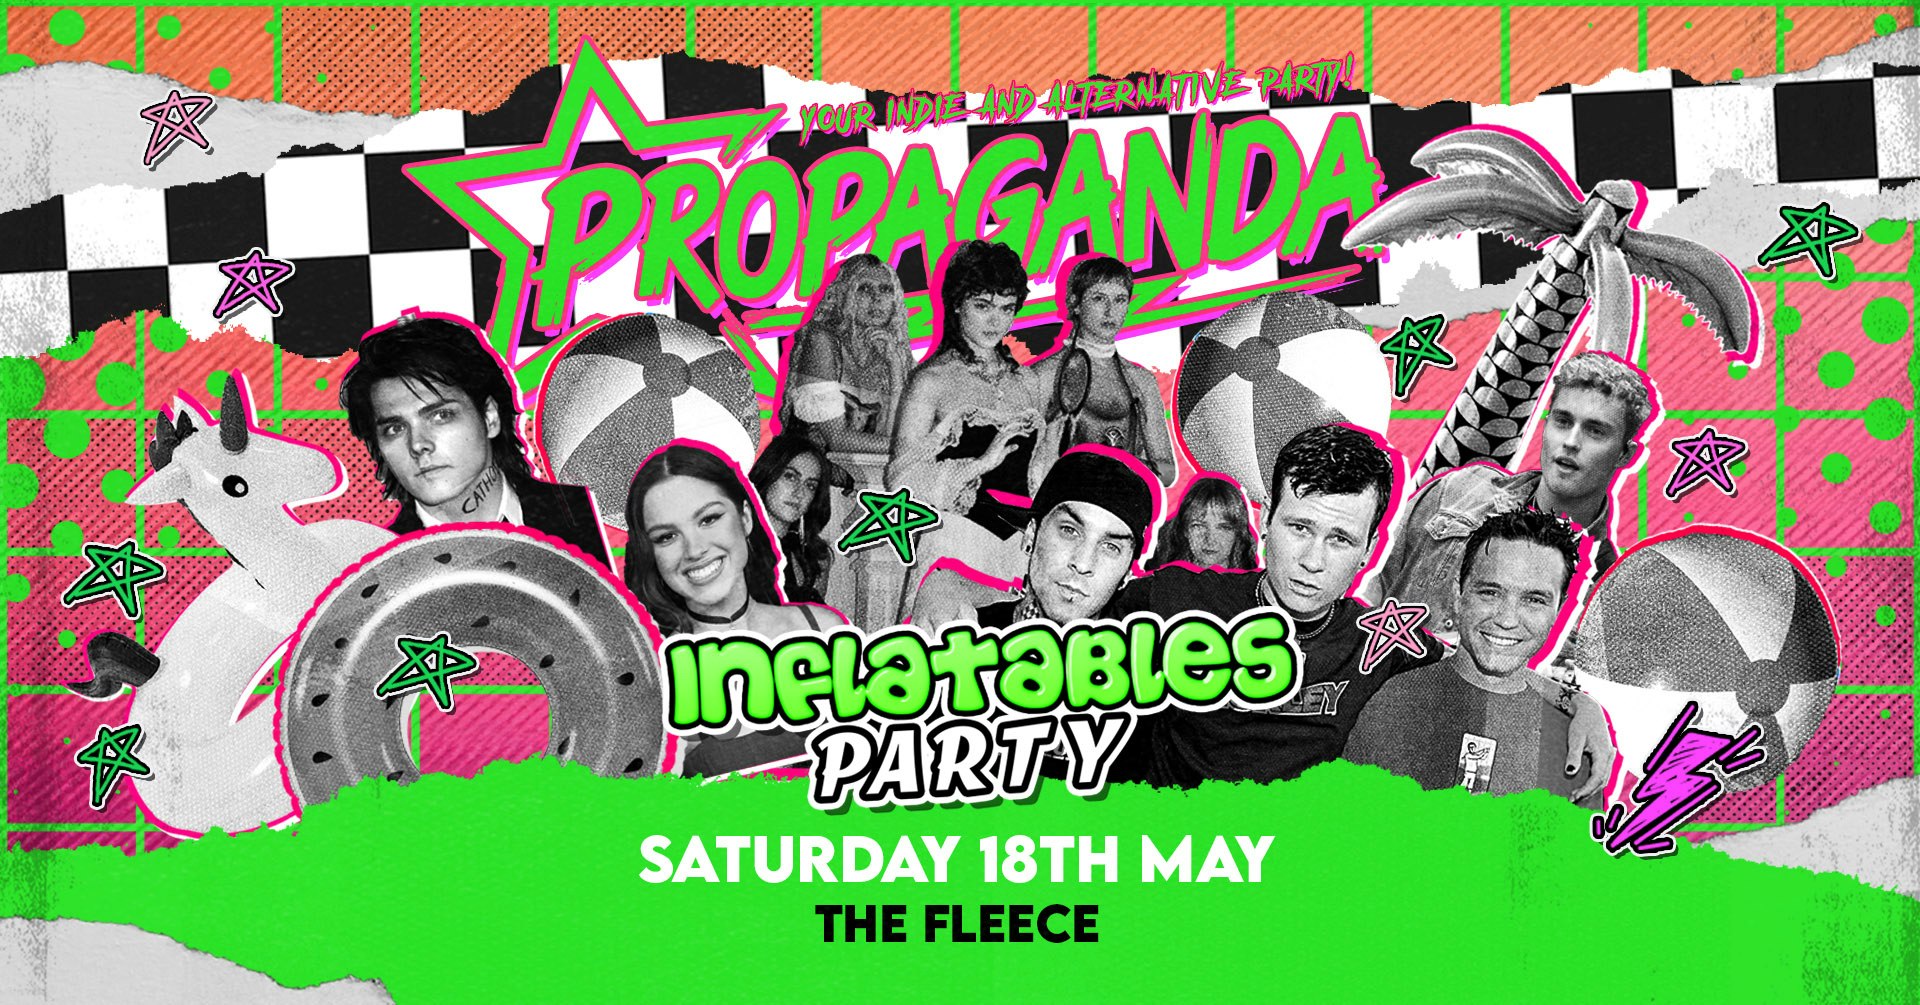 TONIGHT! Inflatables Party! – Propaganda Bristol – Your Indie & Alternative Party!